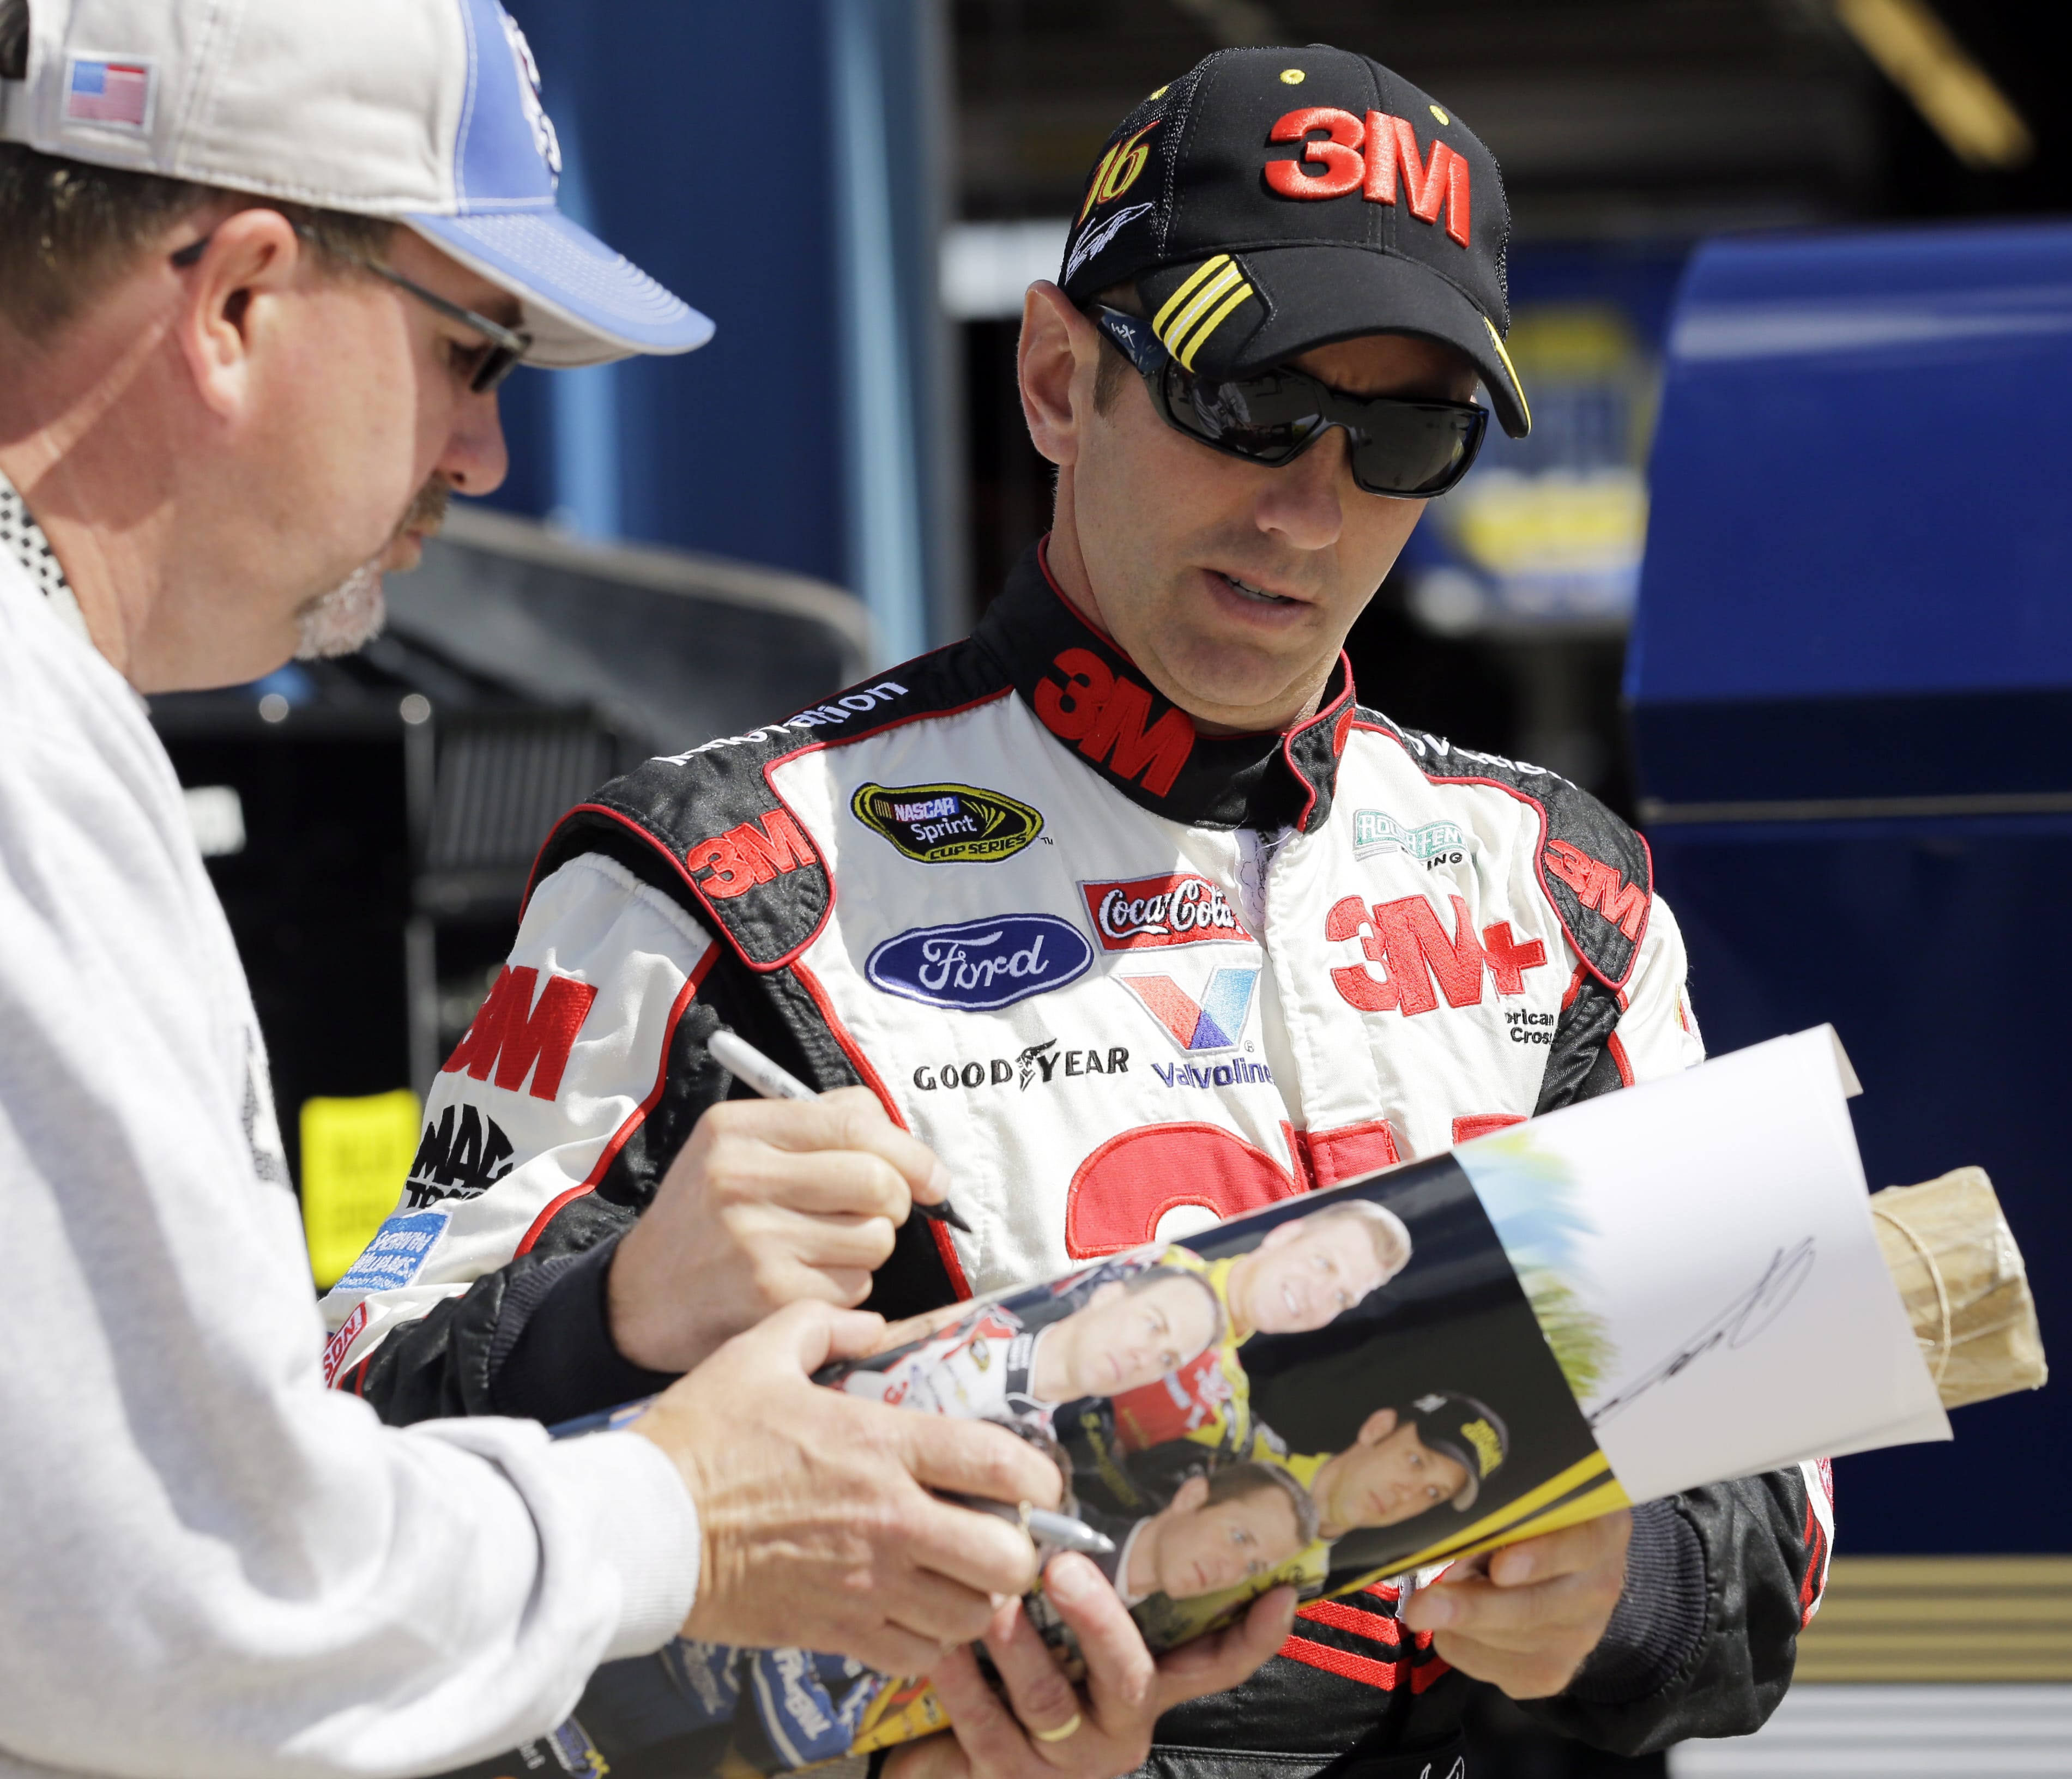 Driver Greg Biffle, right, signs an autograph for a fan as he walks to his garage during practice for Sunday's NASCAR Sprint Cup Series auto race at Chicagoland Speedway in Joliet, Ill., Friday, Sept. 13, 2013. (AP Photo/Nam Y.